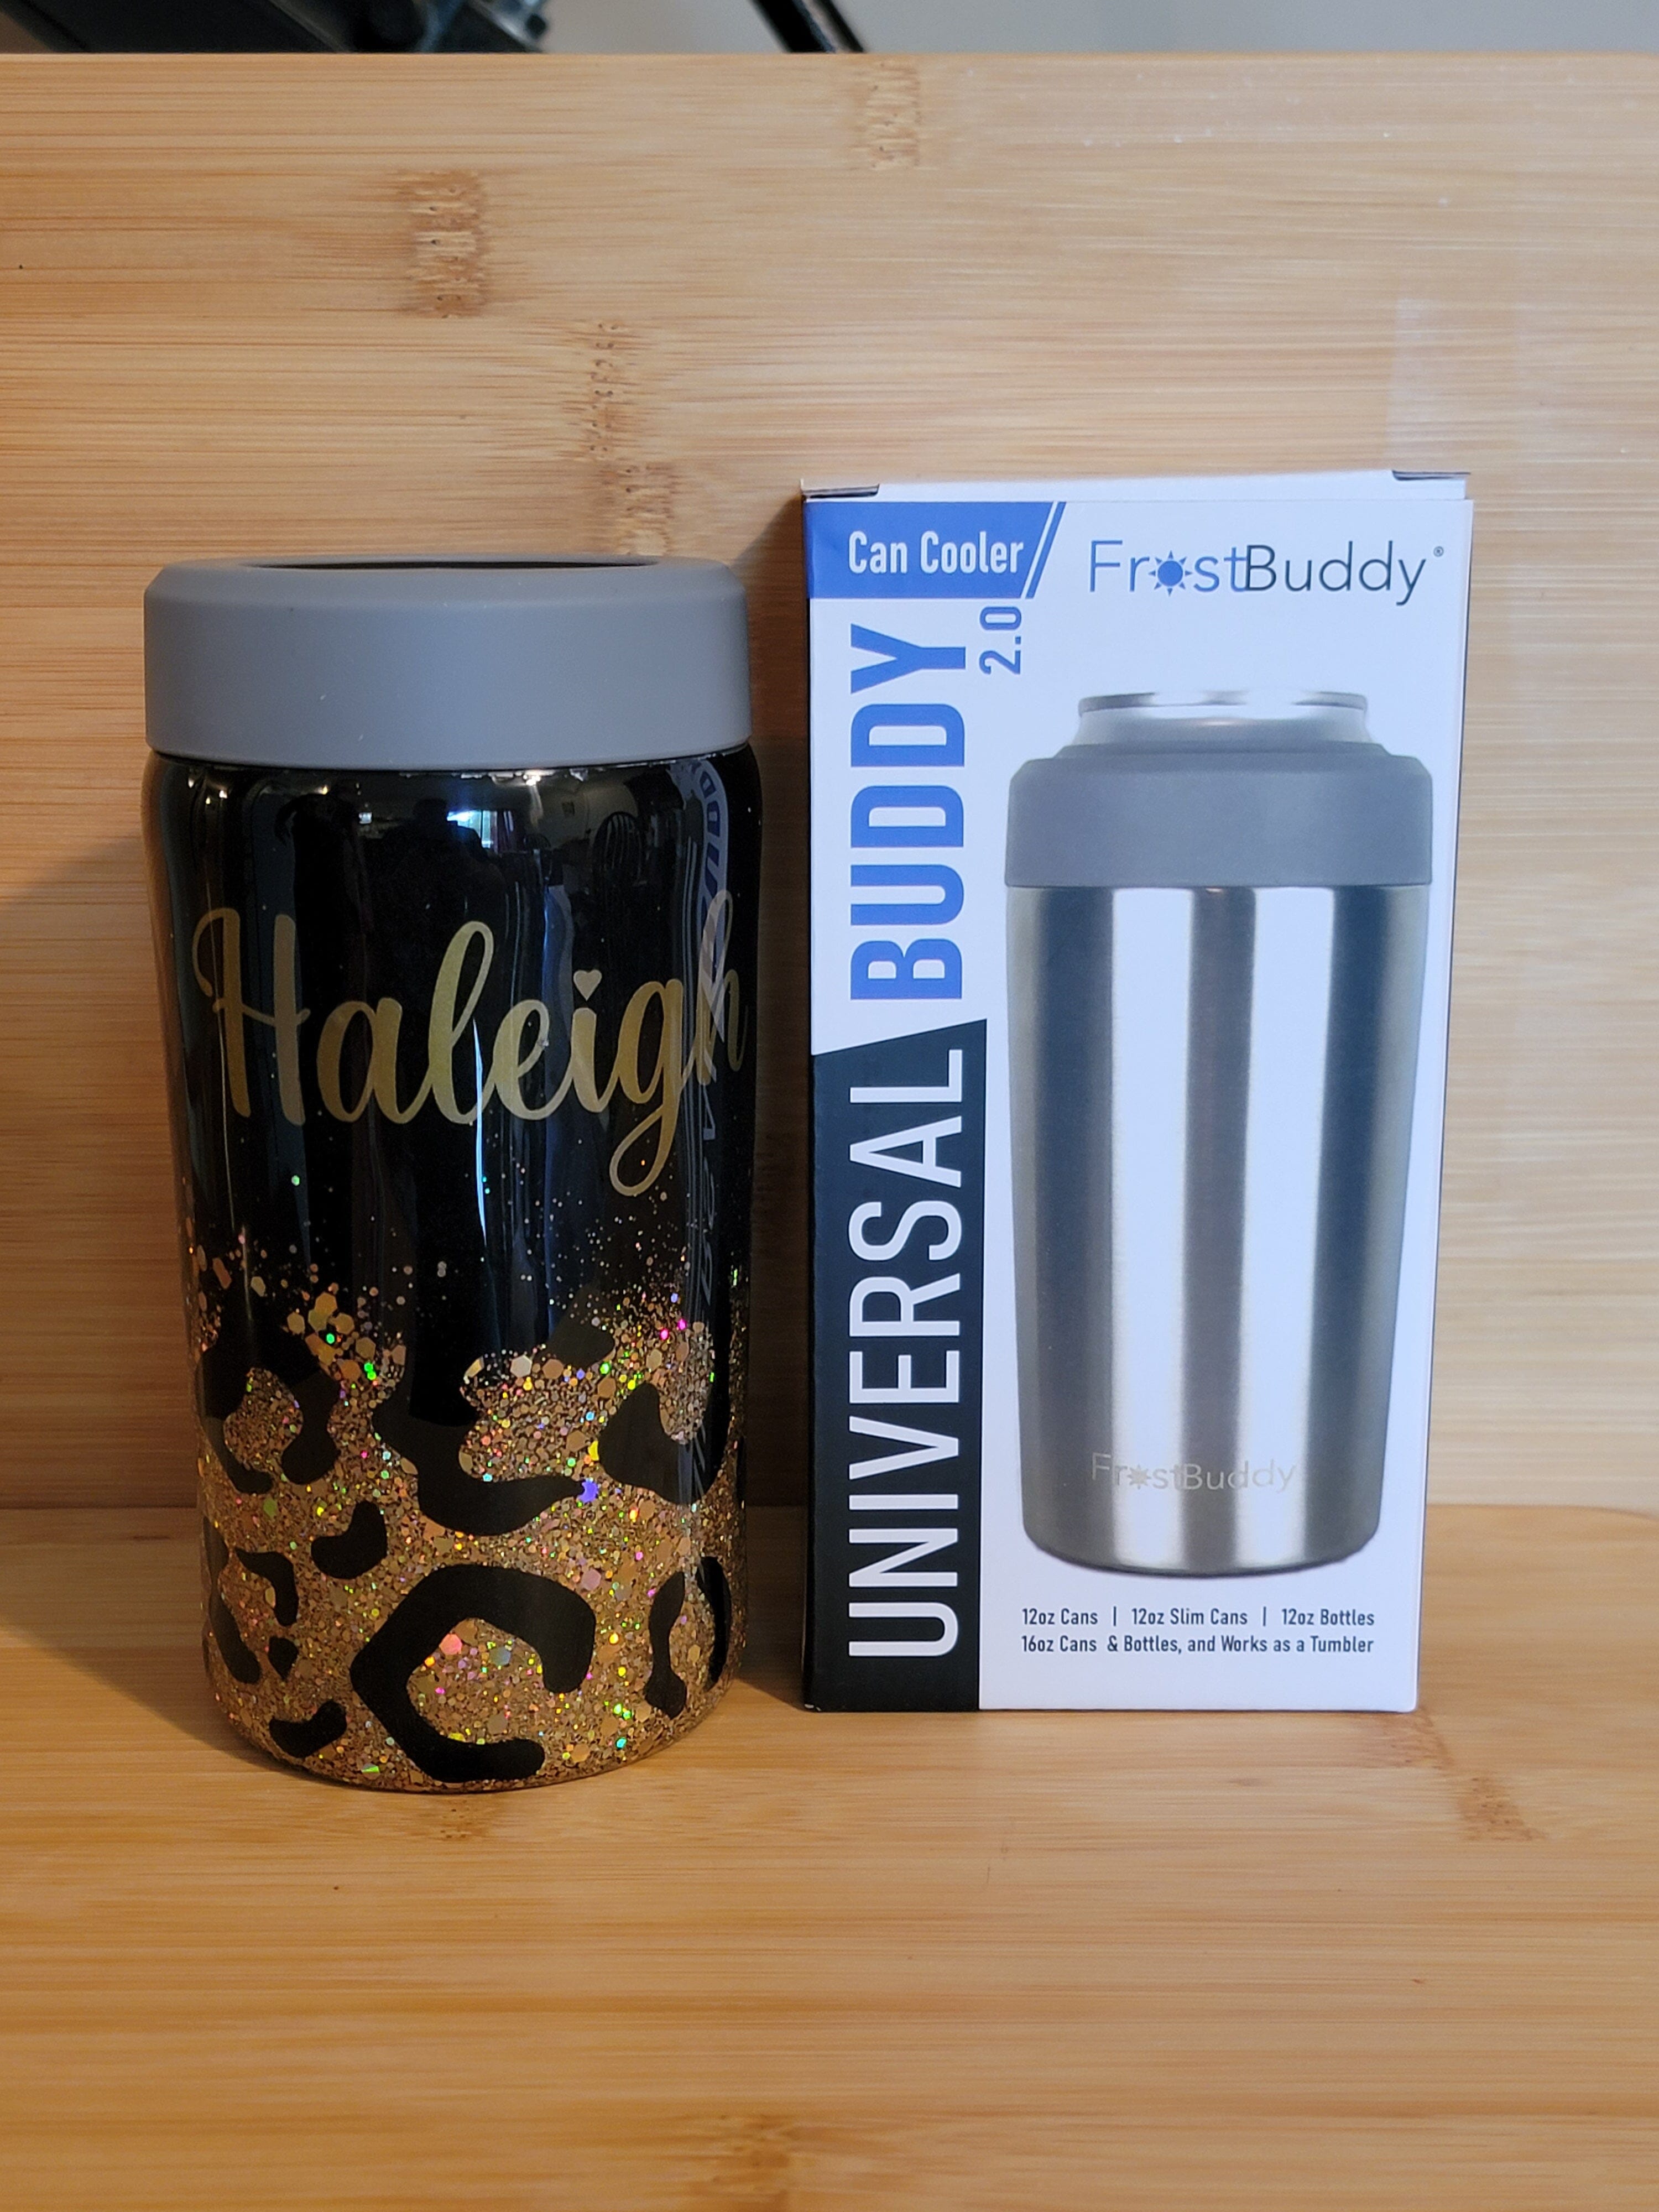 https://cdn.shopify.com/s/files/1/0659/8390/6035/products/frost-buddy-universal-can-cooler-gravesfamilycreations-722833.jpg?v=1689508751